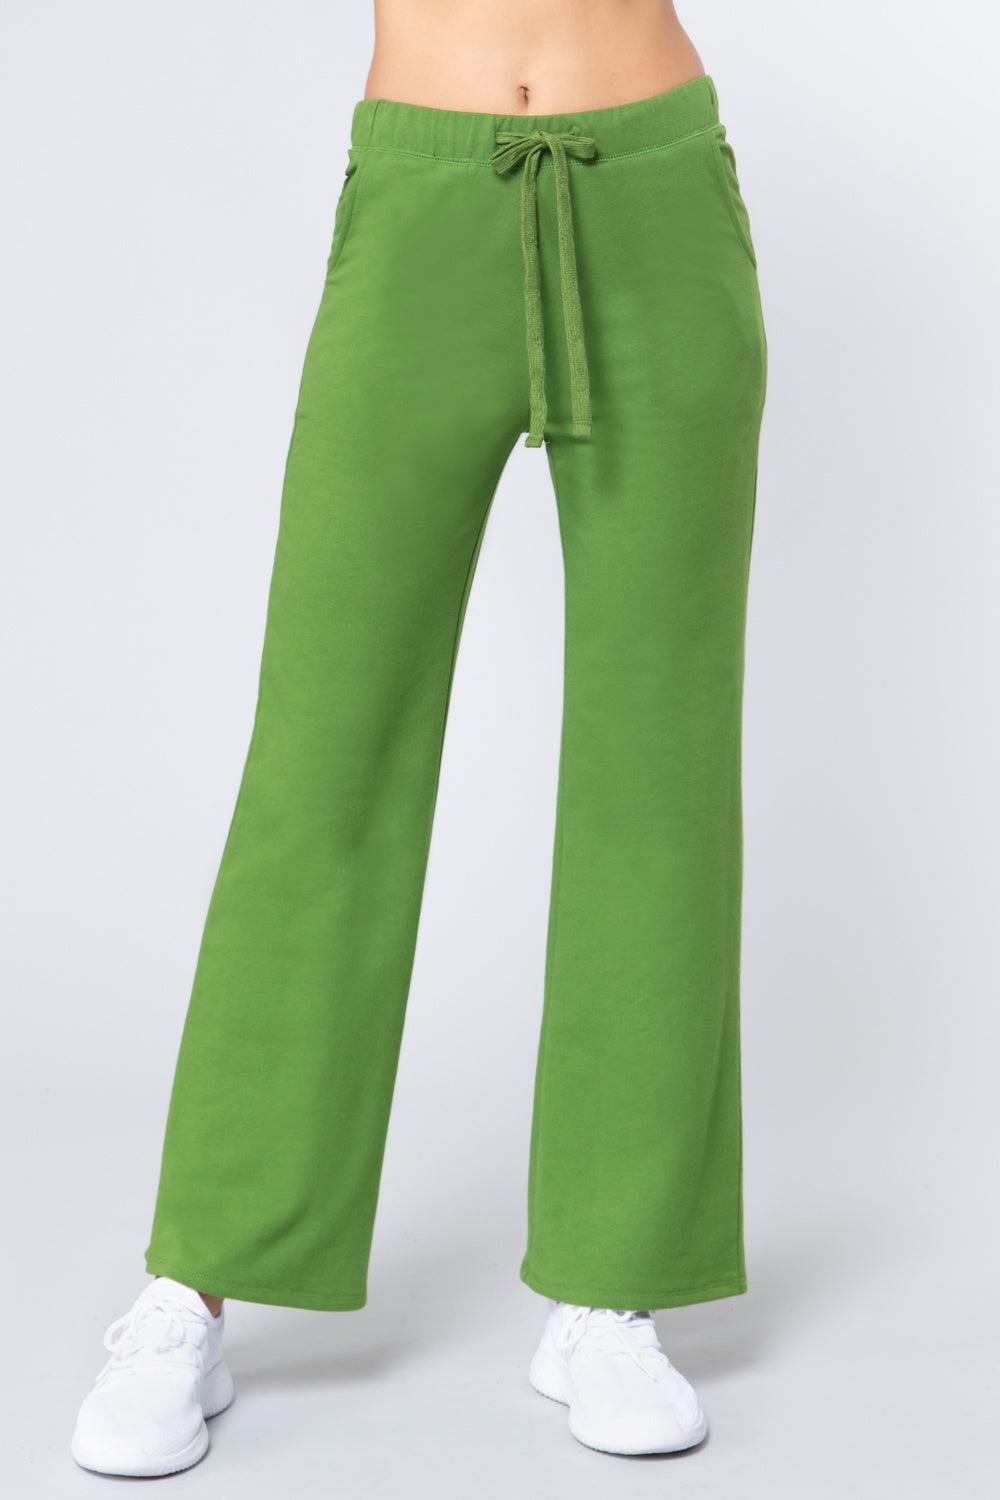 French Terry Long Pants